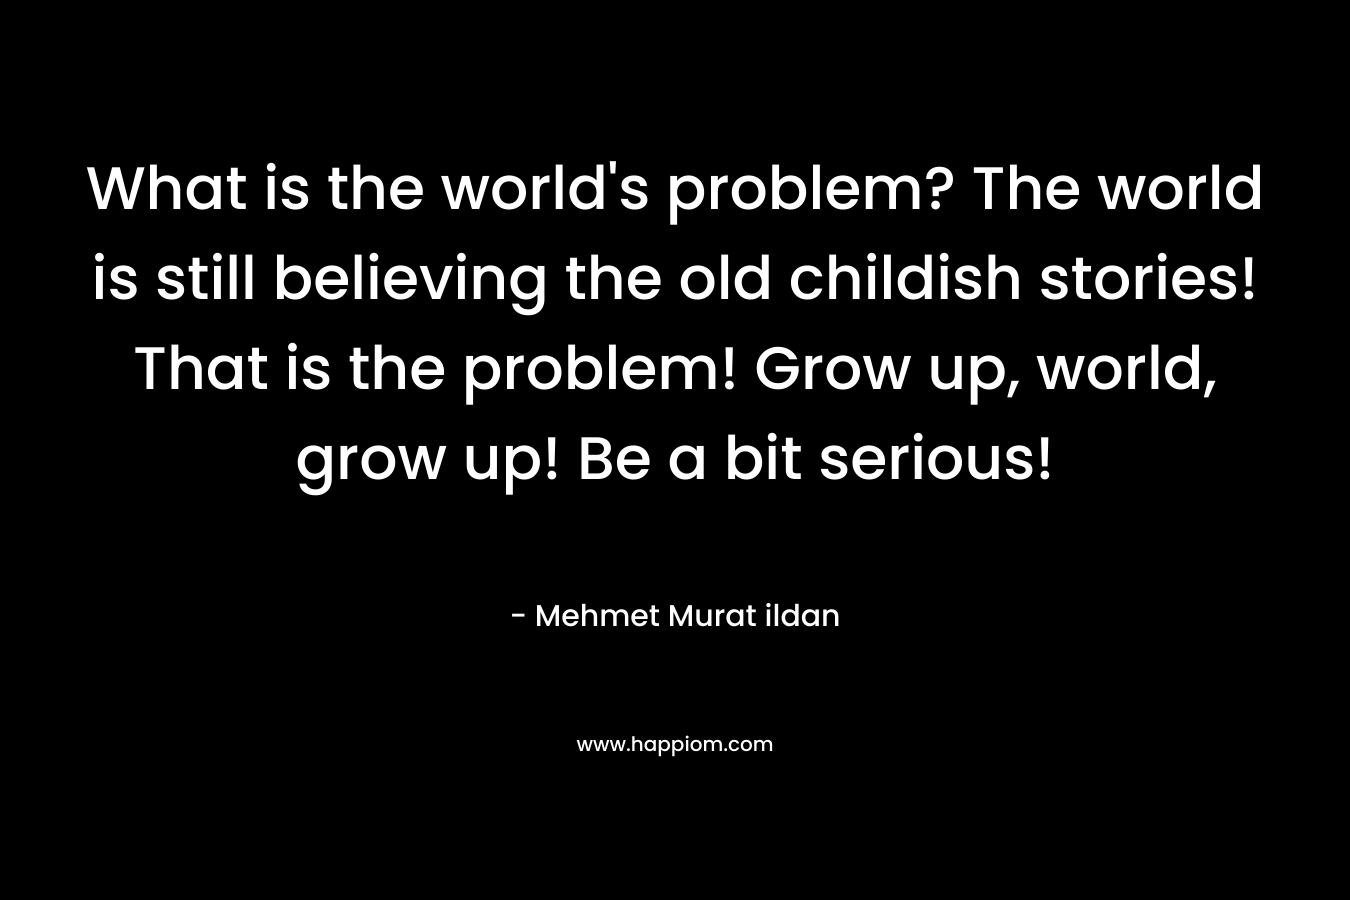 What is the world's problem? The world is still believing the old childish stories! That is the problem! Grow up, world, grow up! Be a bit serious!